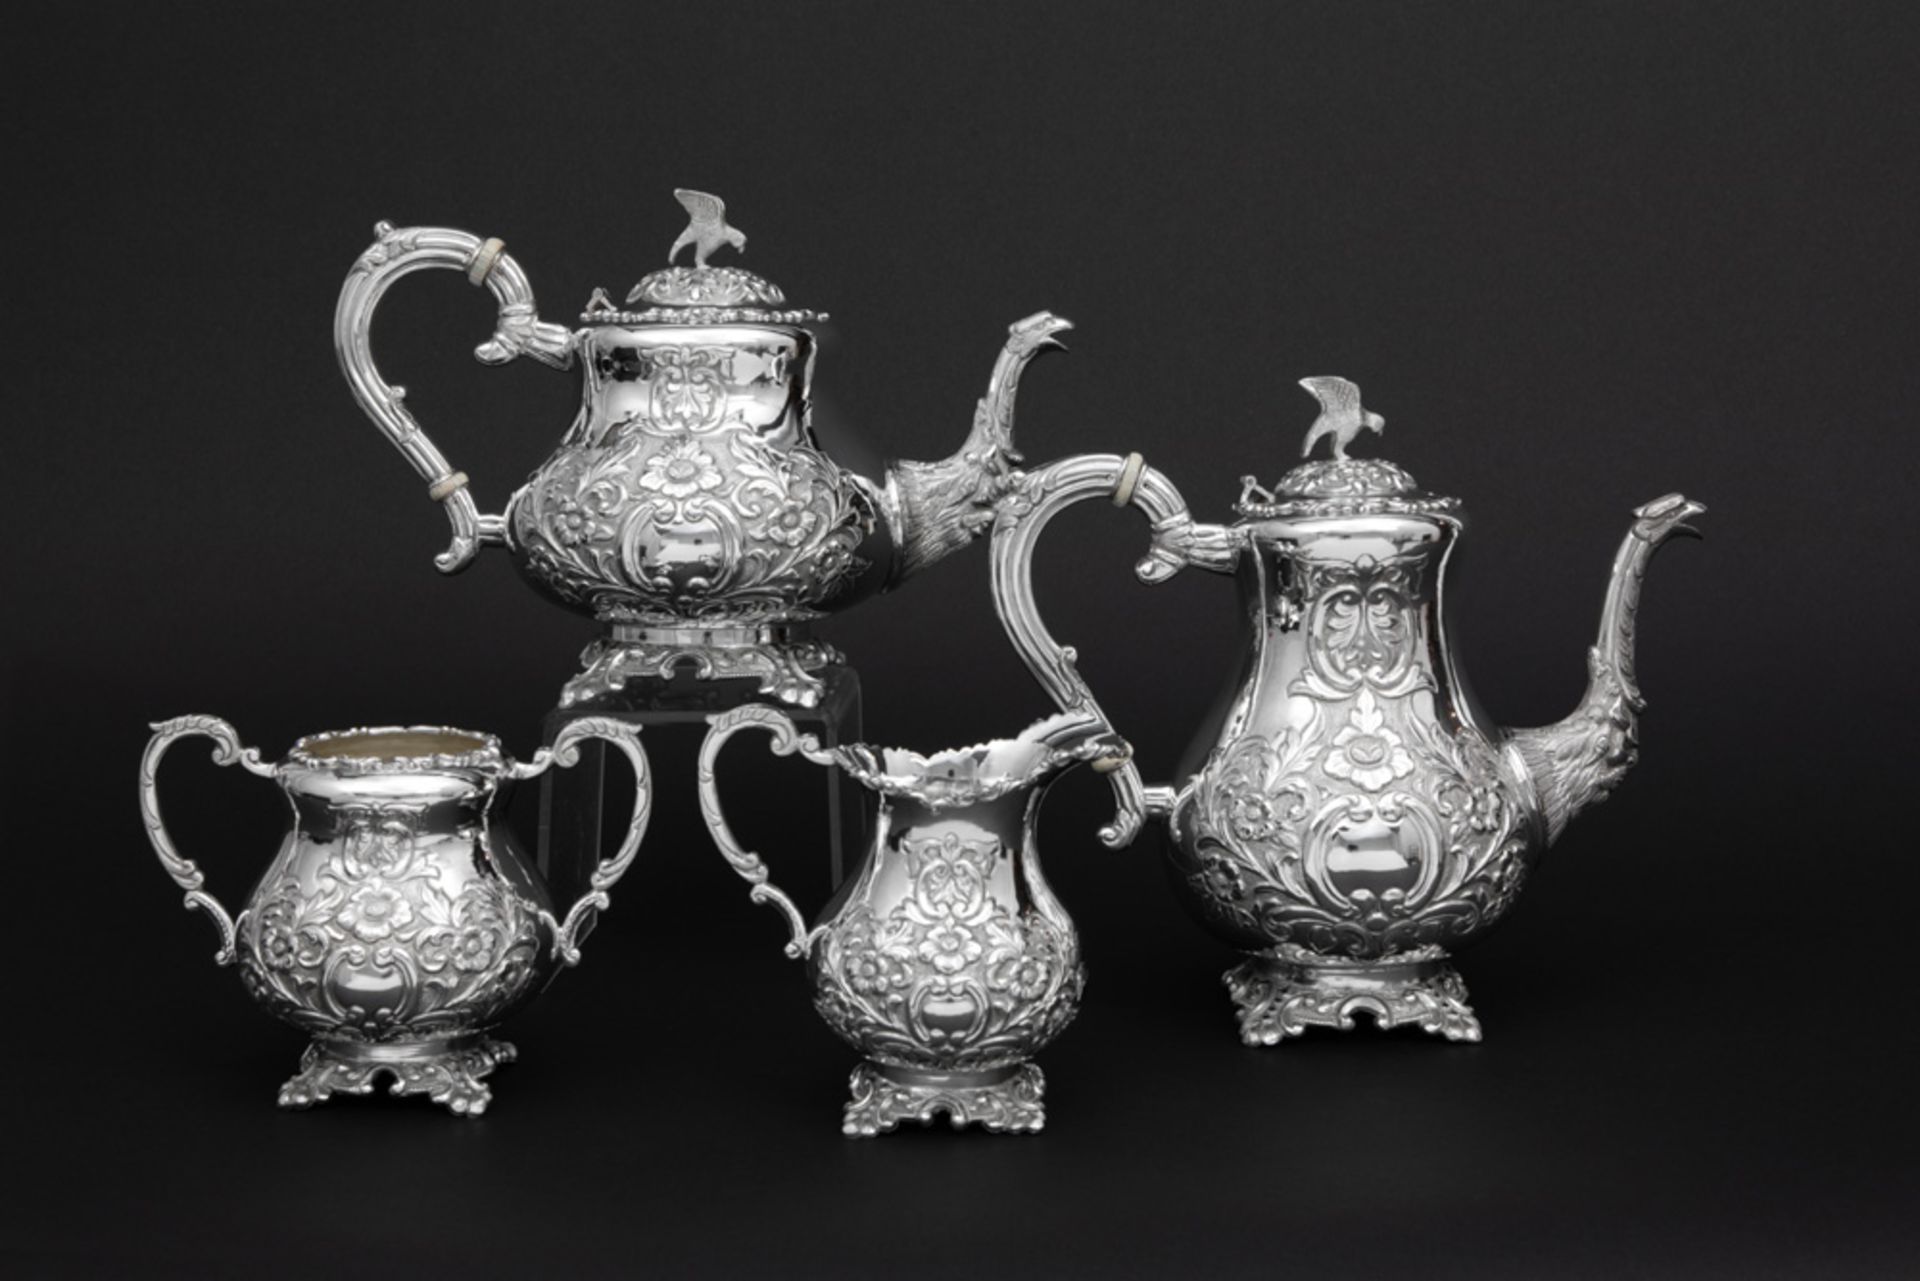 4pc coffee and teaset in silver - with its case || Vierdelig koffie- en theestel in massief zilver - - Image 2 of 5